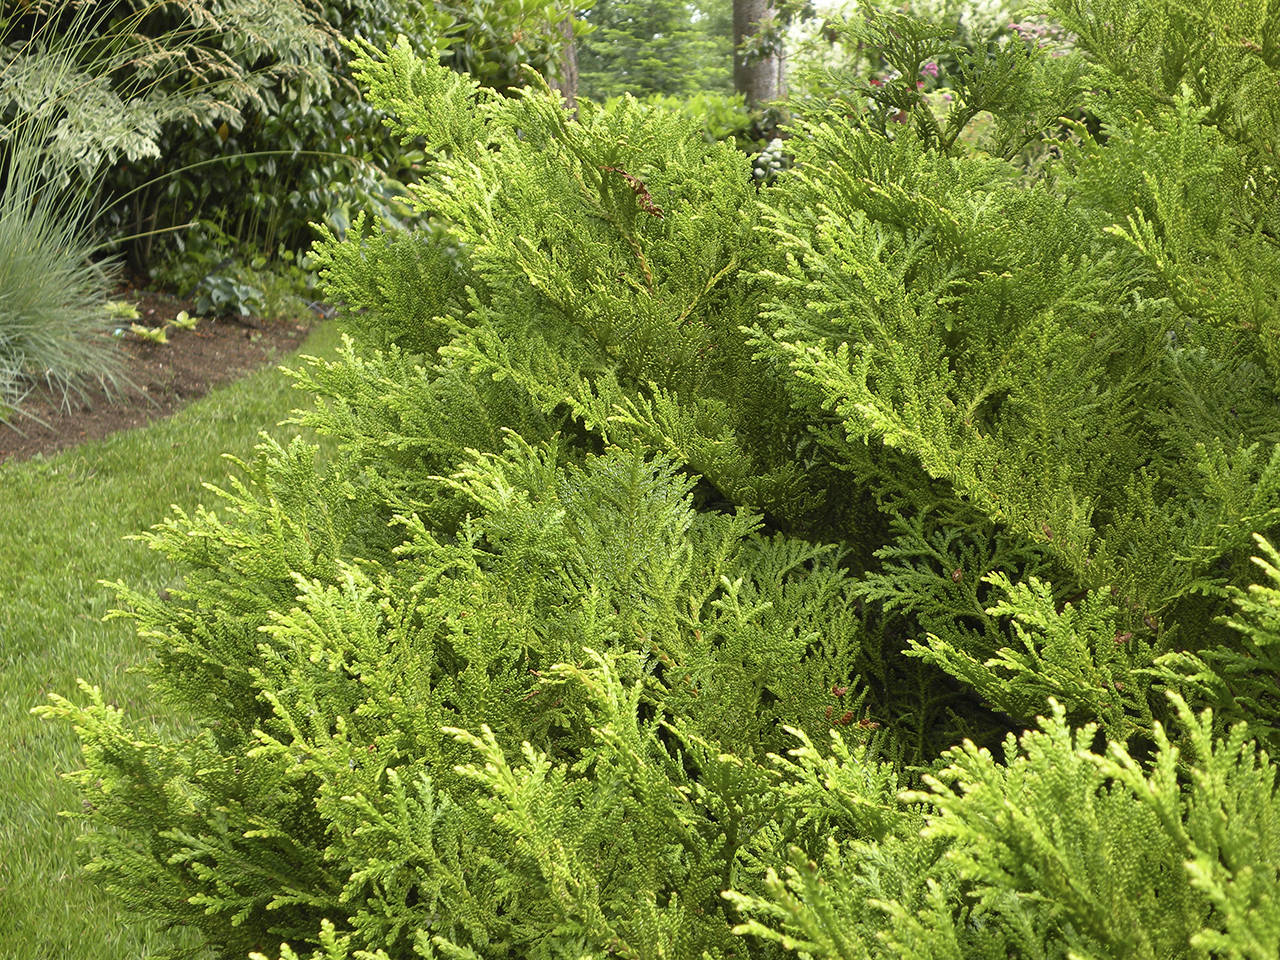 Dwarf hiba cedar has bold antler-like foliage. The leaves are deep green on one side but have bits of white on the other. (Rick Peterson)